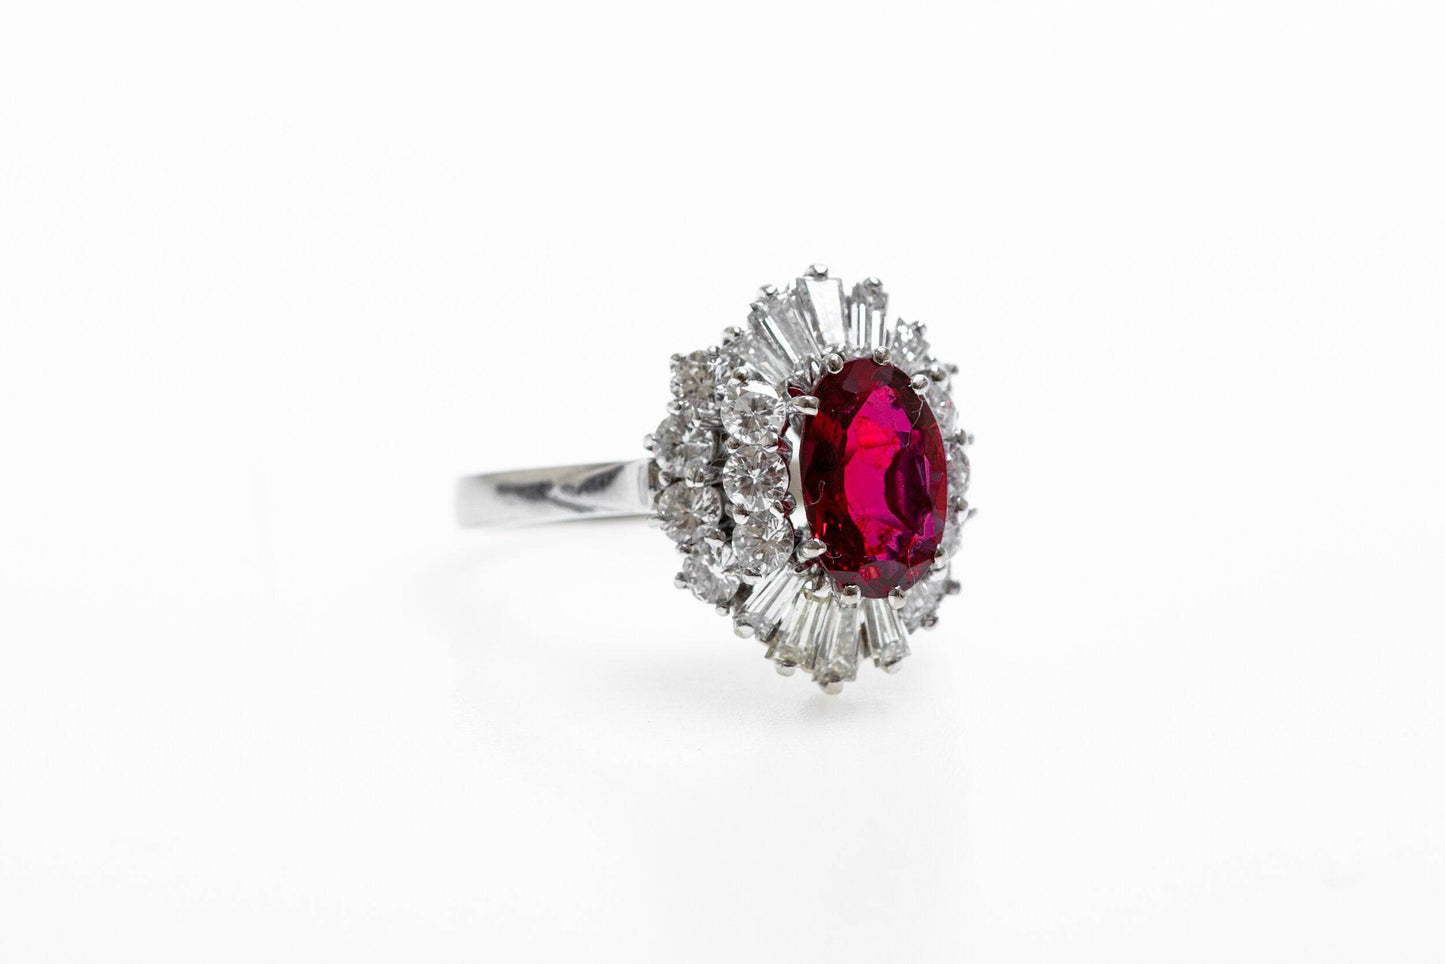 A very fine Natural Untreated Siam Ruby  and Diamond Cluster Ring set in 18ct White Gold, Circa 1970 - Robin Haydock Antiques